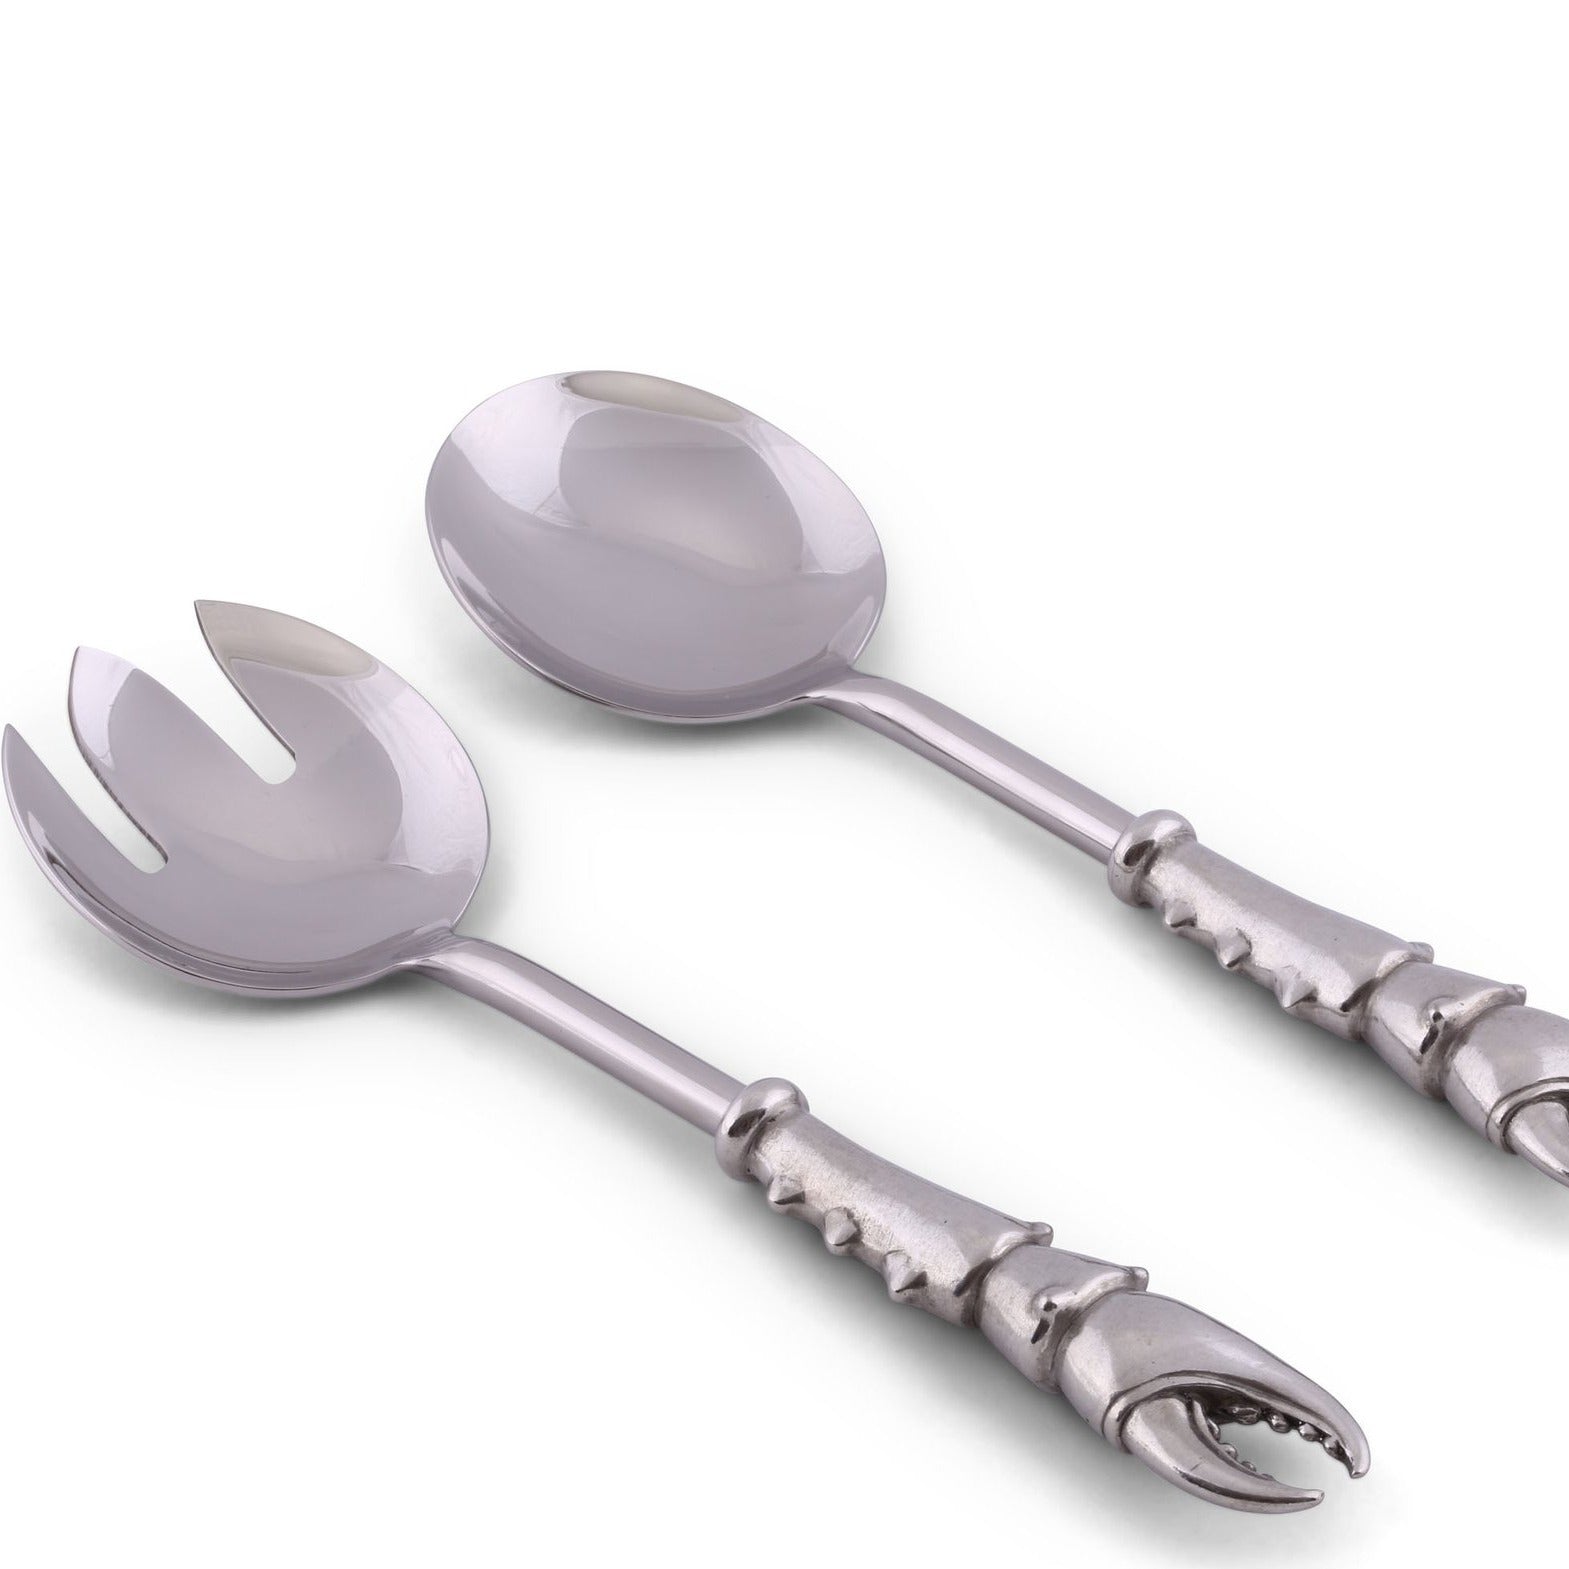 Pewter Handled King Crab Claw Salad Serving Set - timothy De Clue Collection 